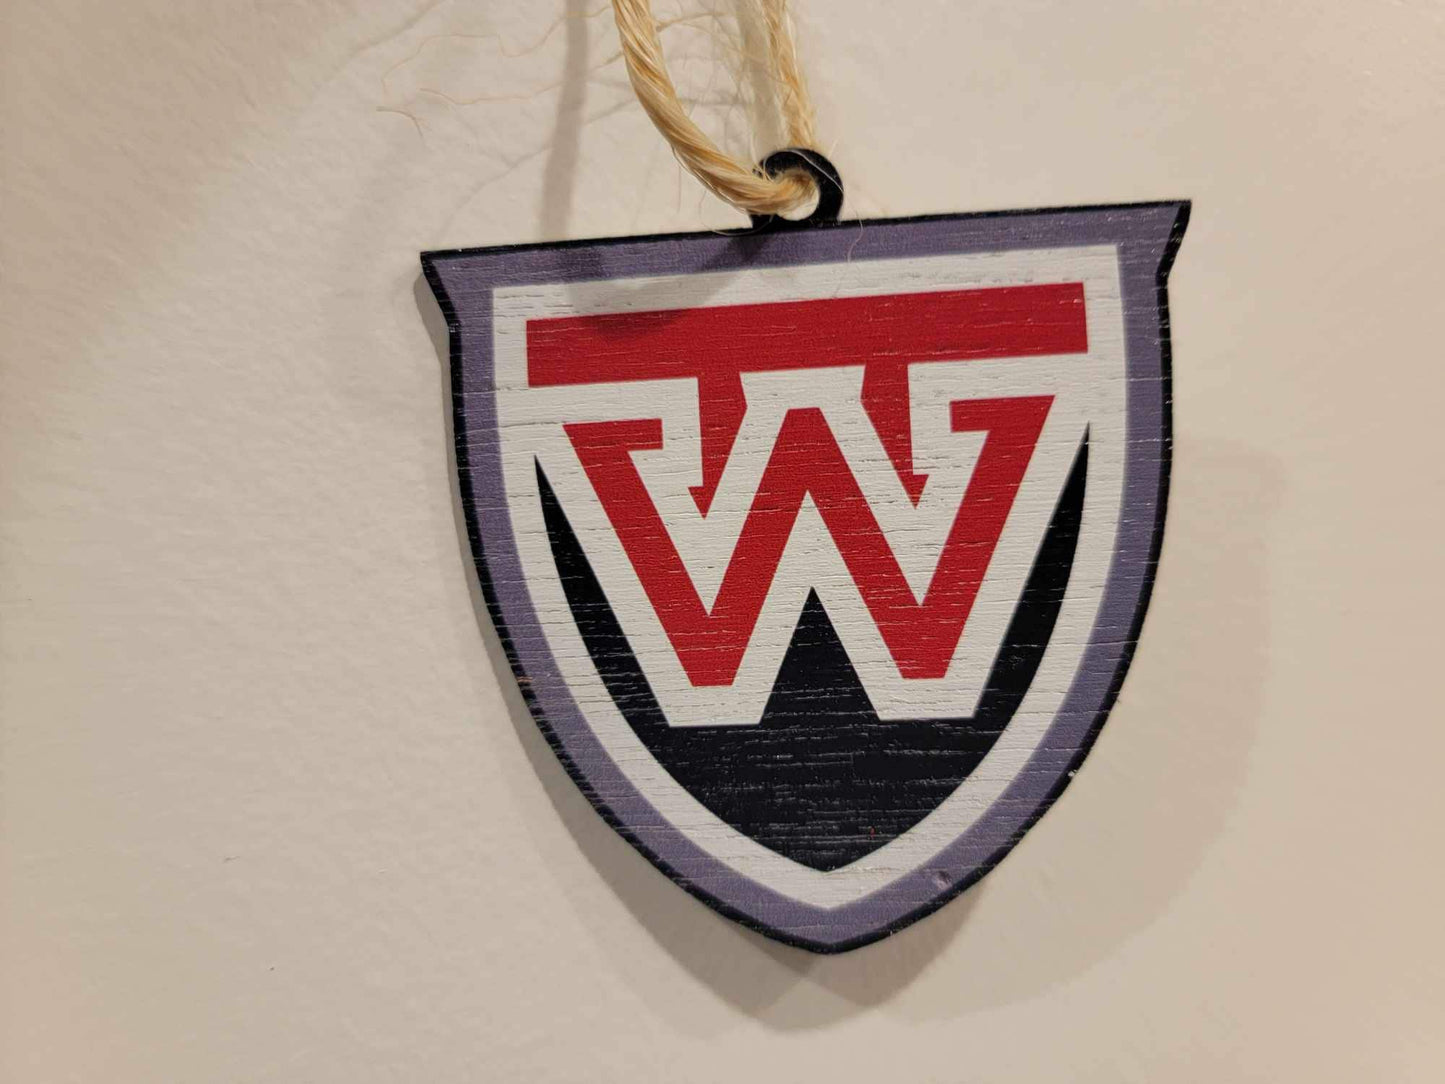 School Mascot Ornament W Westfall Mustang Wood Printed Color Sign Sheild Red and Blue Ohio Handmade Christmas Tree